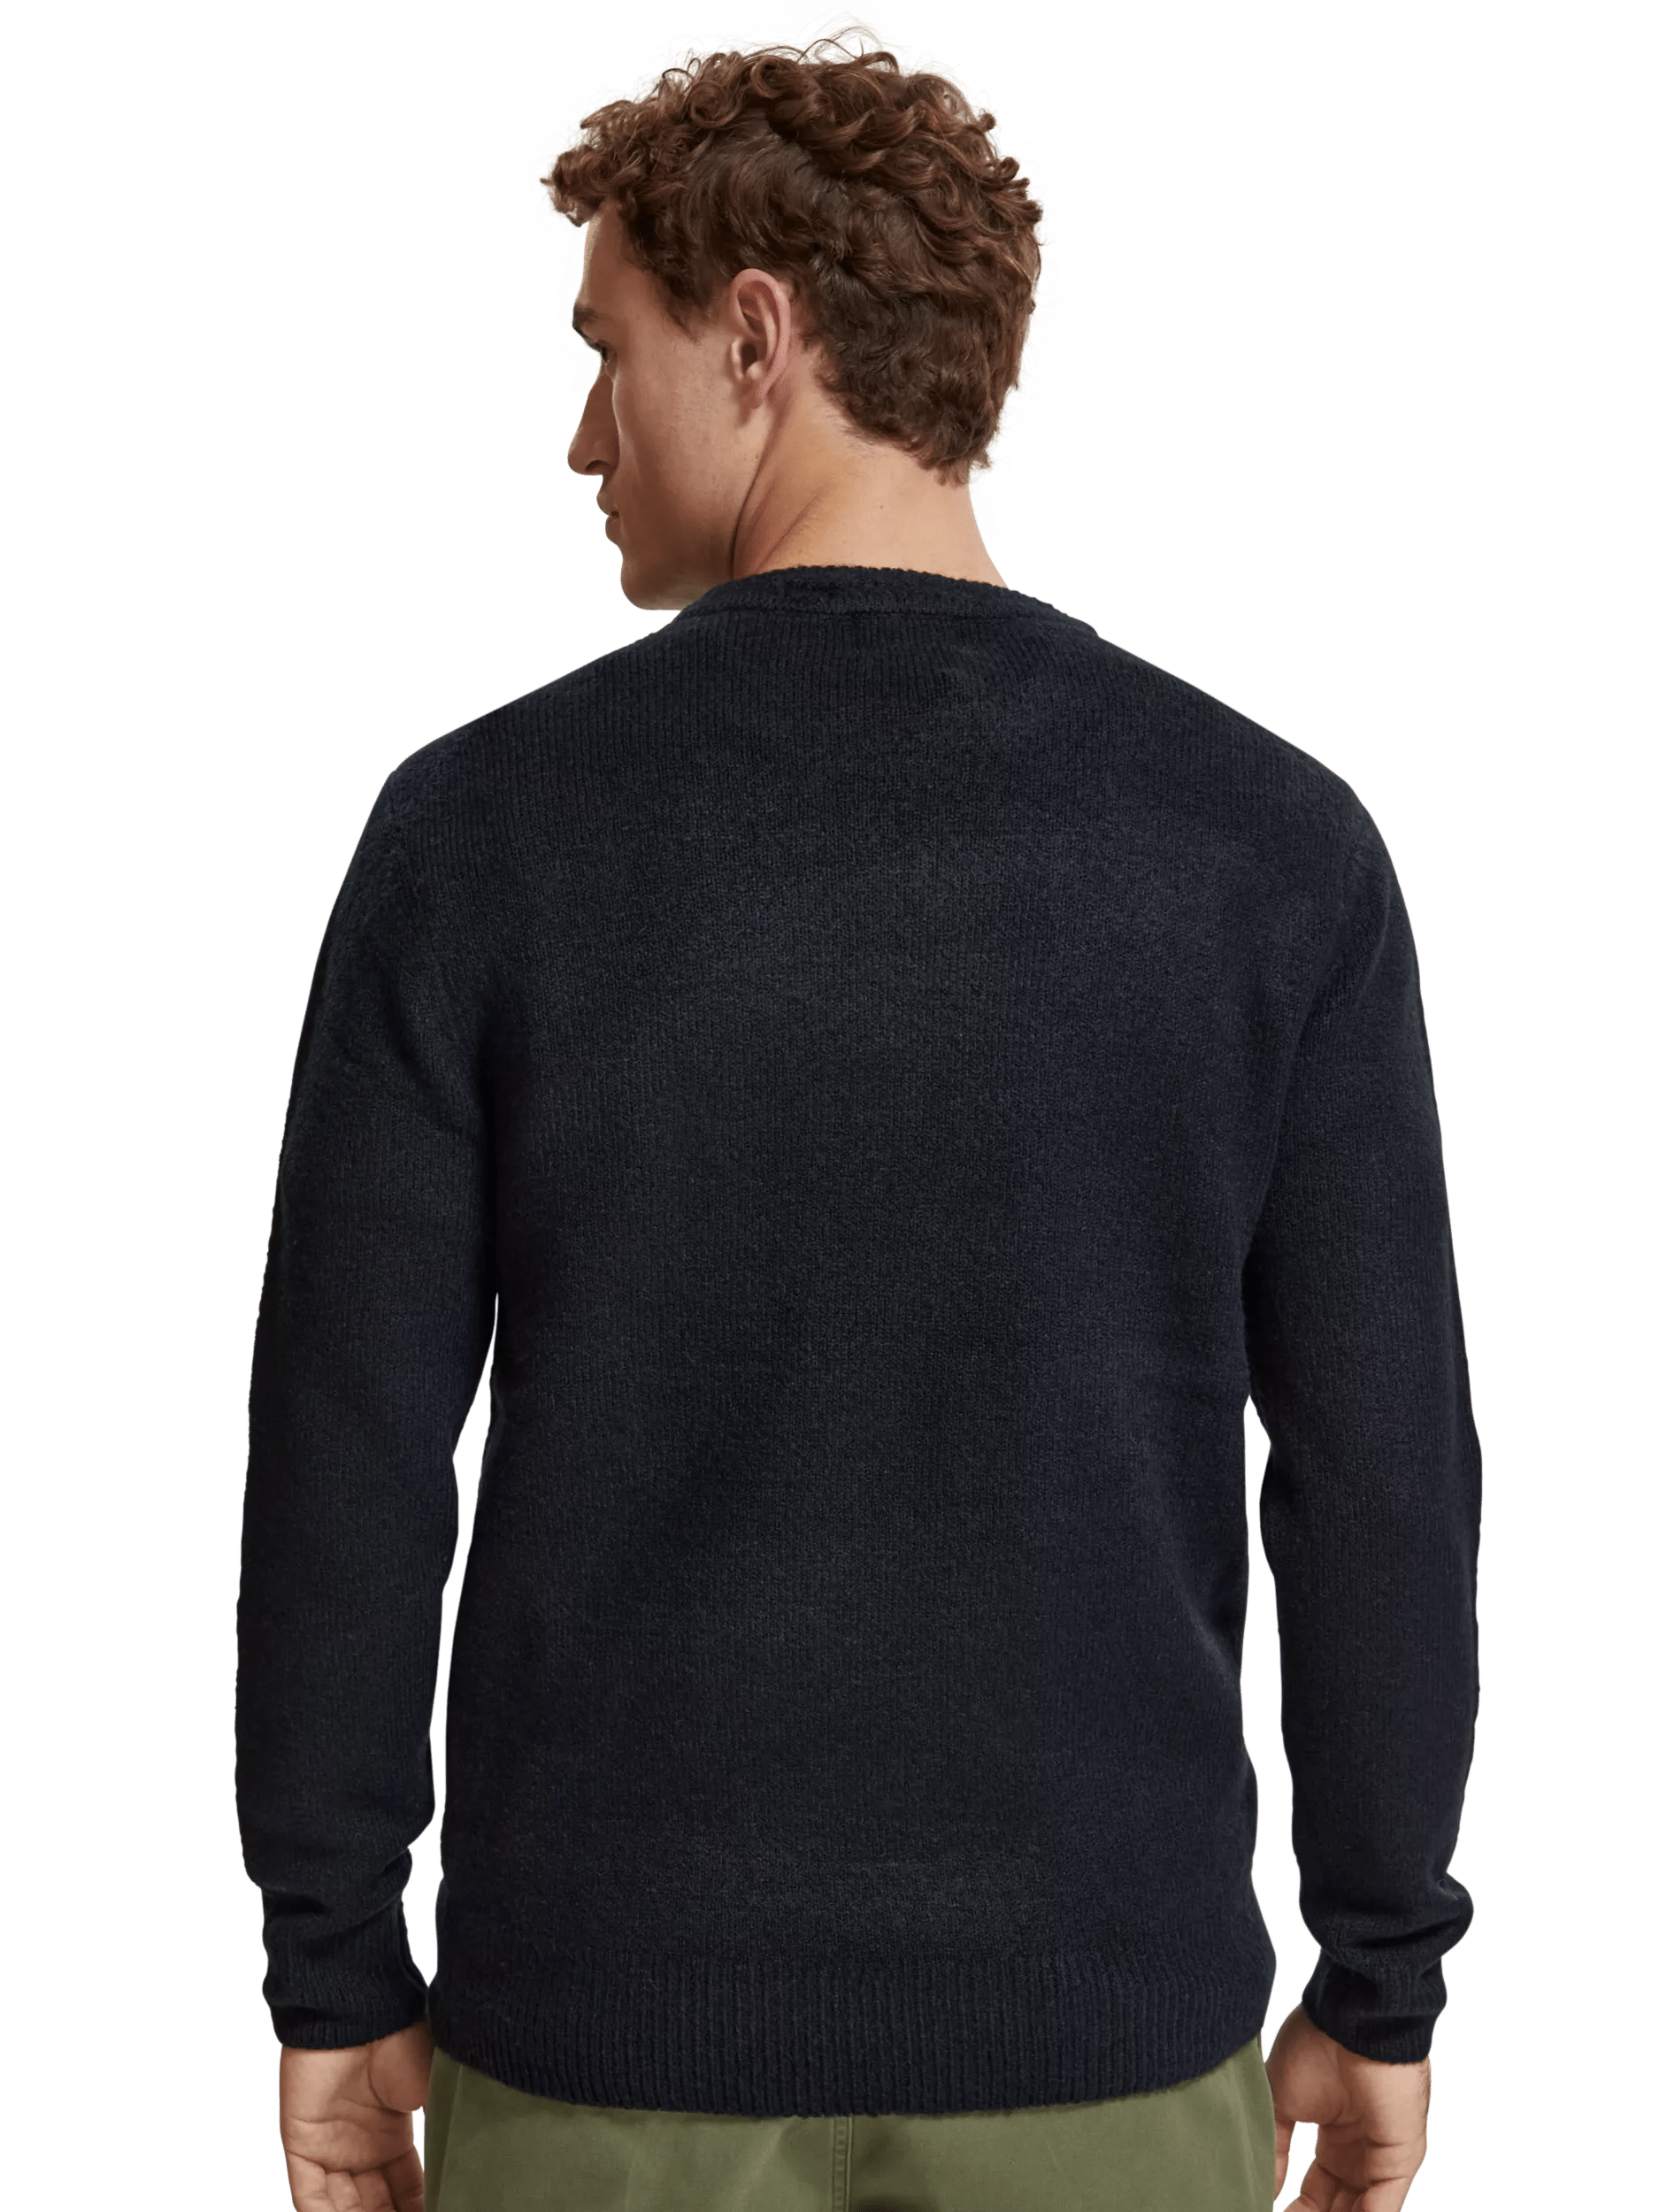 Scotch & Soda Pullover-sweater met normale pasvorm MDL-BCK